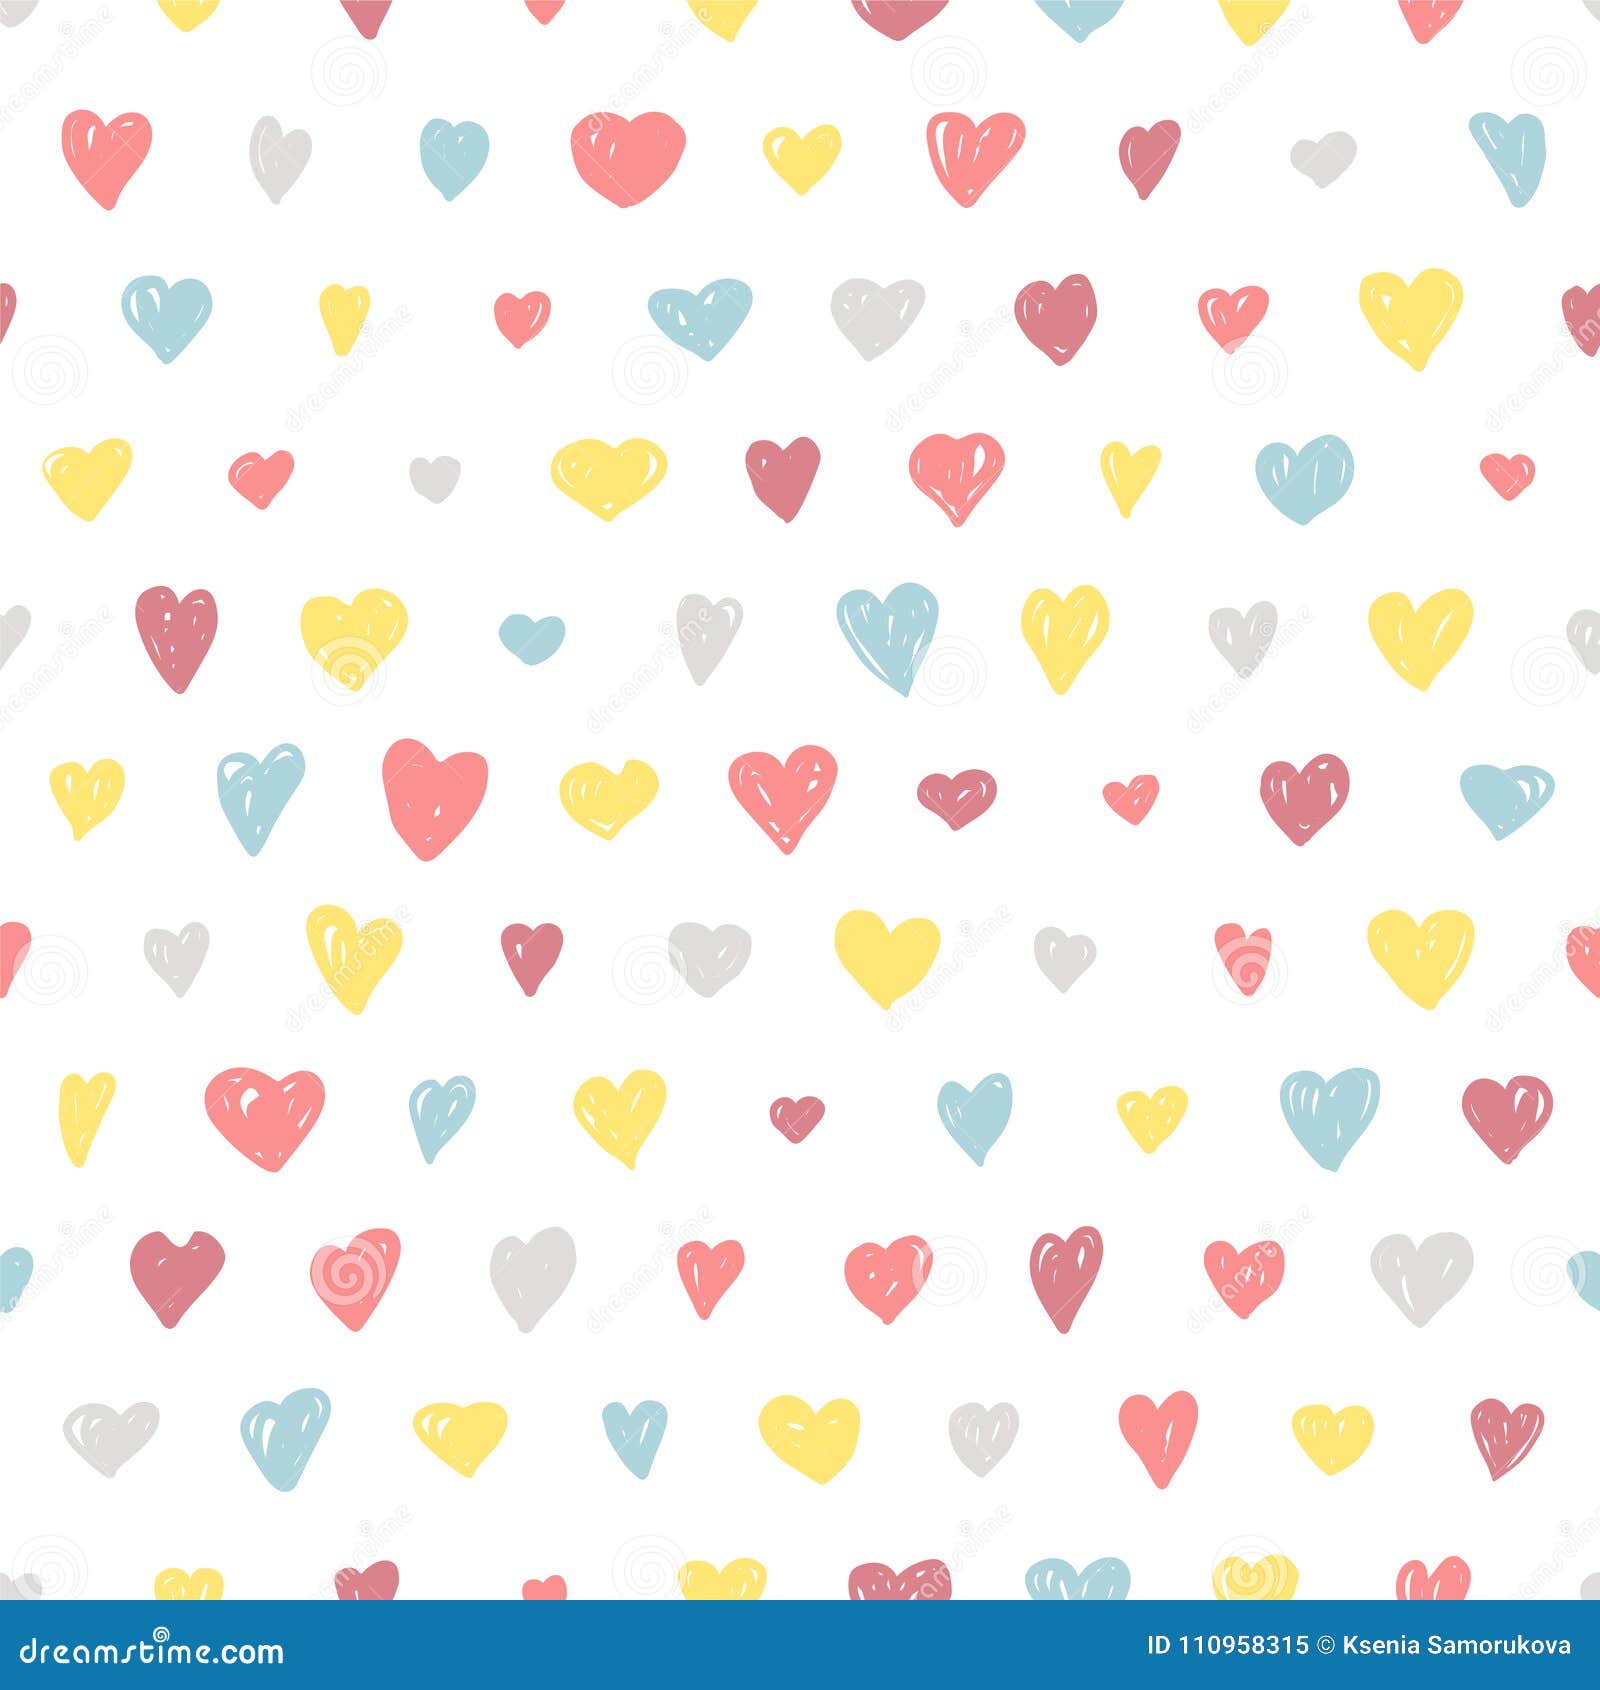 Seamless Pattern - Flat Doodle Hearts Stock Vector - Illustration of ...